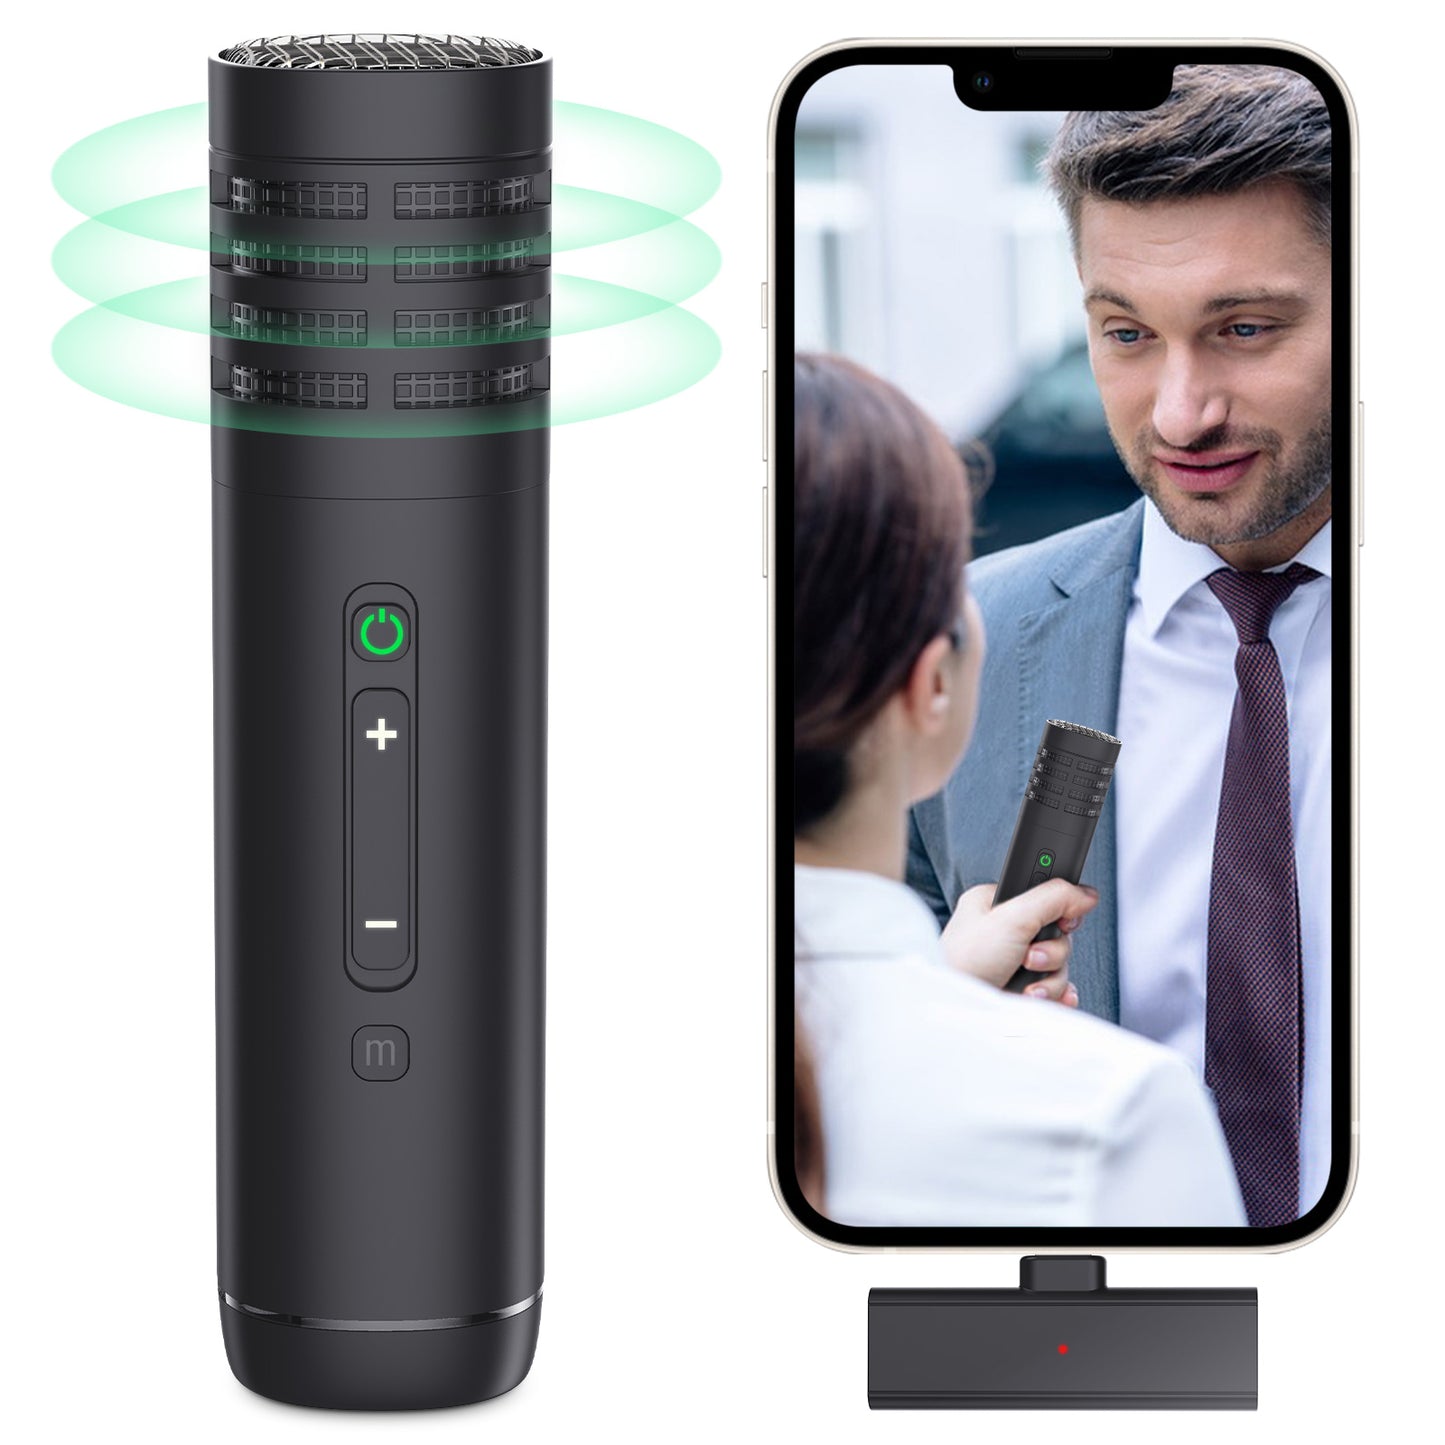 Wireless Handheld Microphone for iPhone iPad, Interview Wireless Recording Mic for Video Vlog TikTok